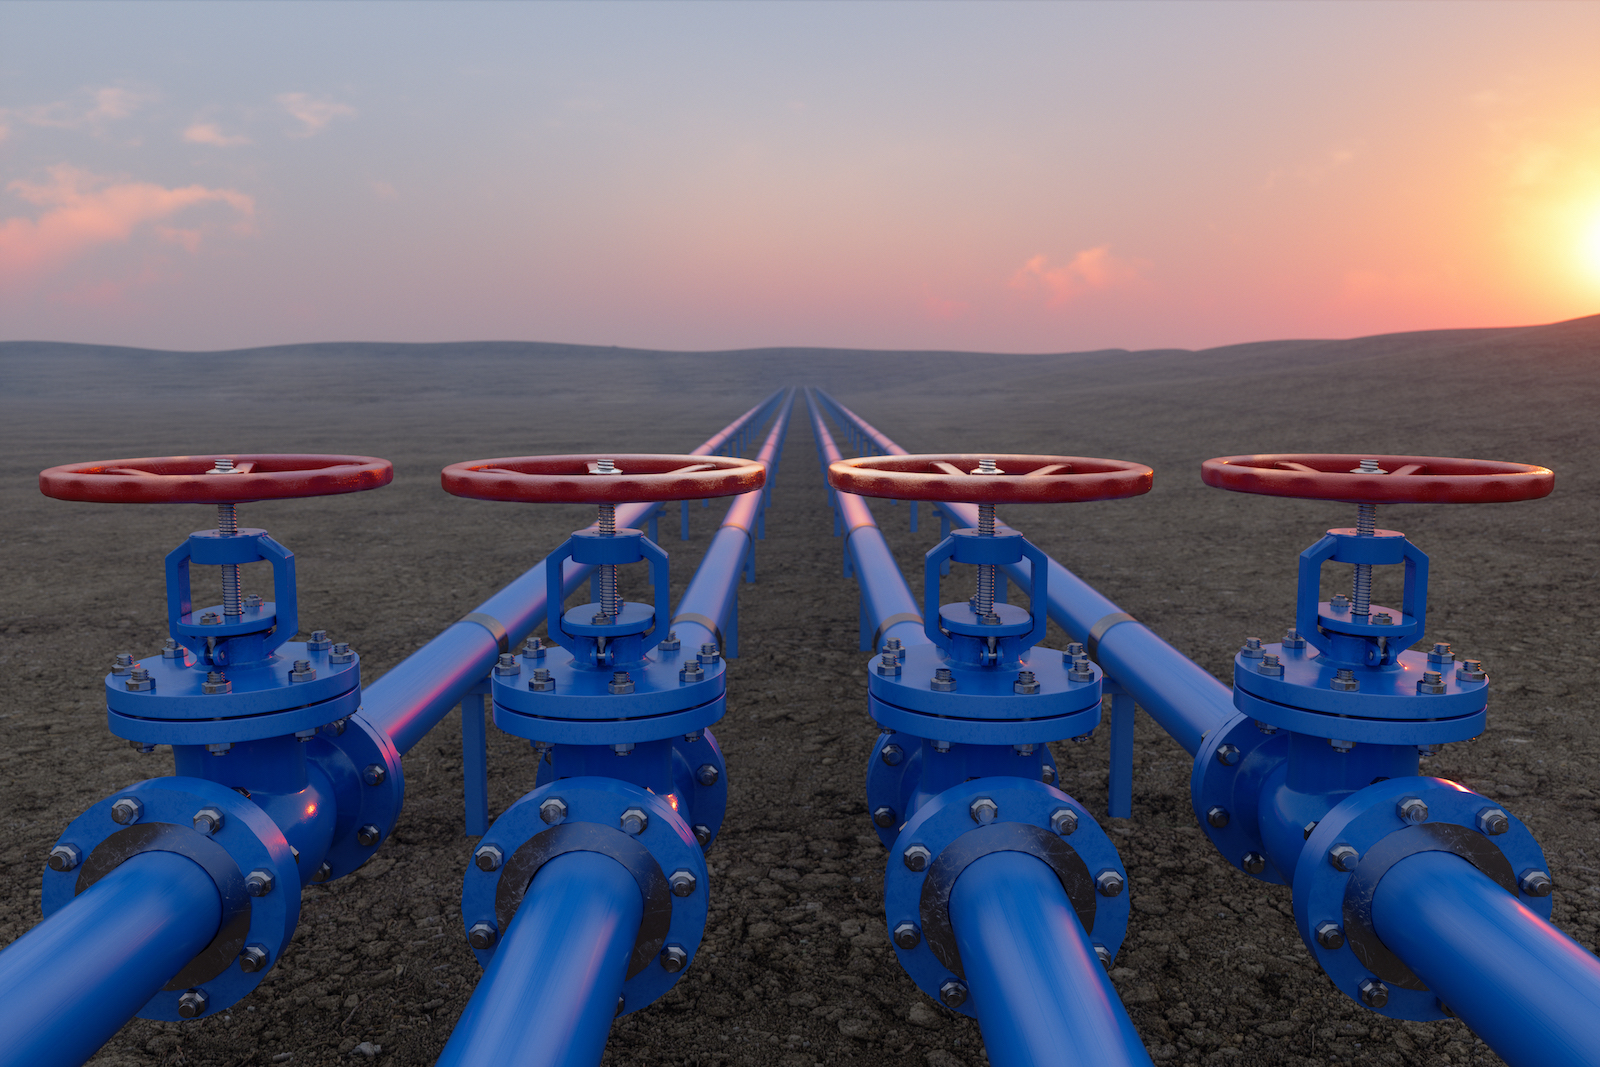 blue pipes with red turner valves stretch across the ground and into the sunset